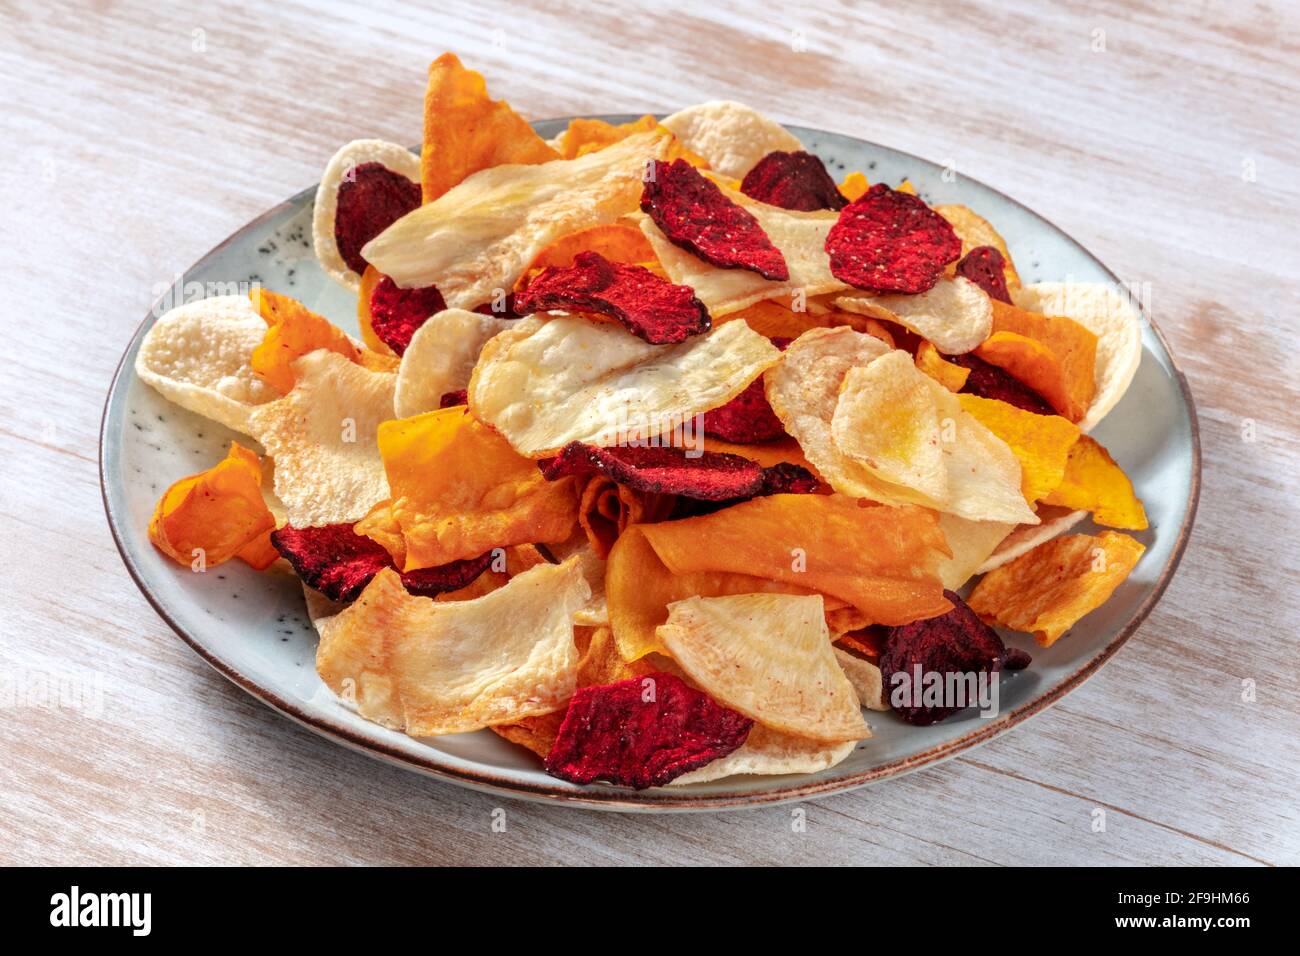 Vegetable chips on a plate, a healthy vegan snack Stock Photo